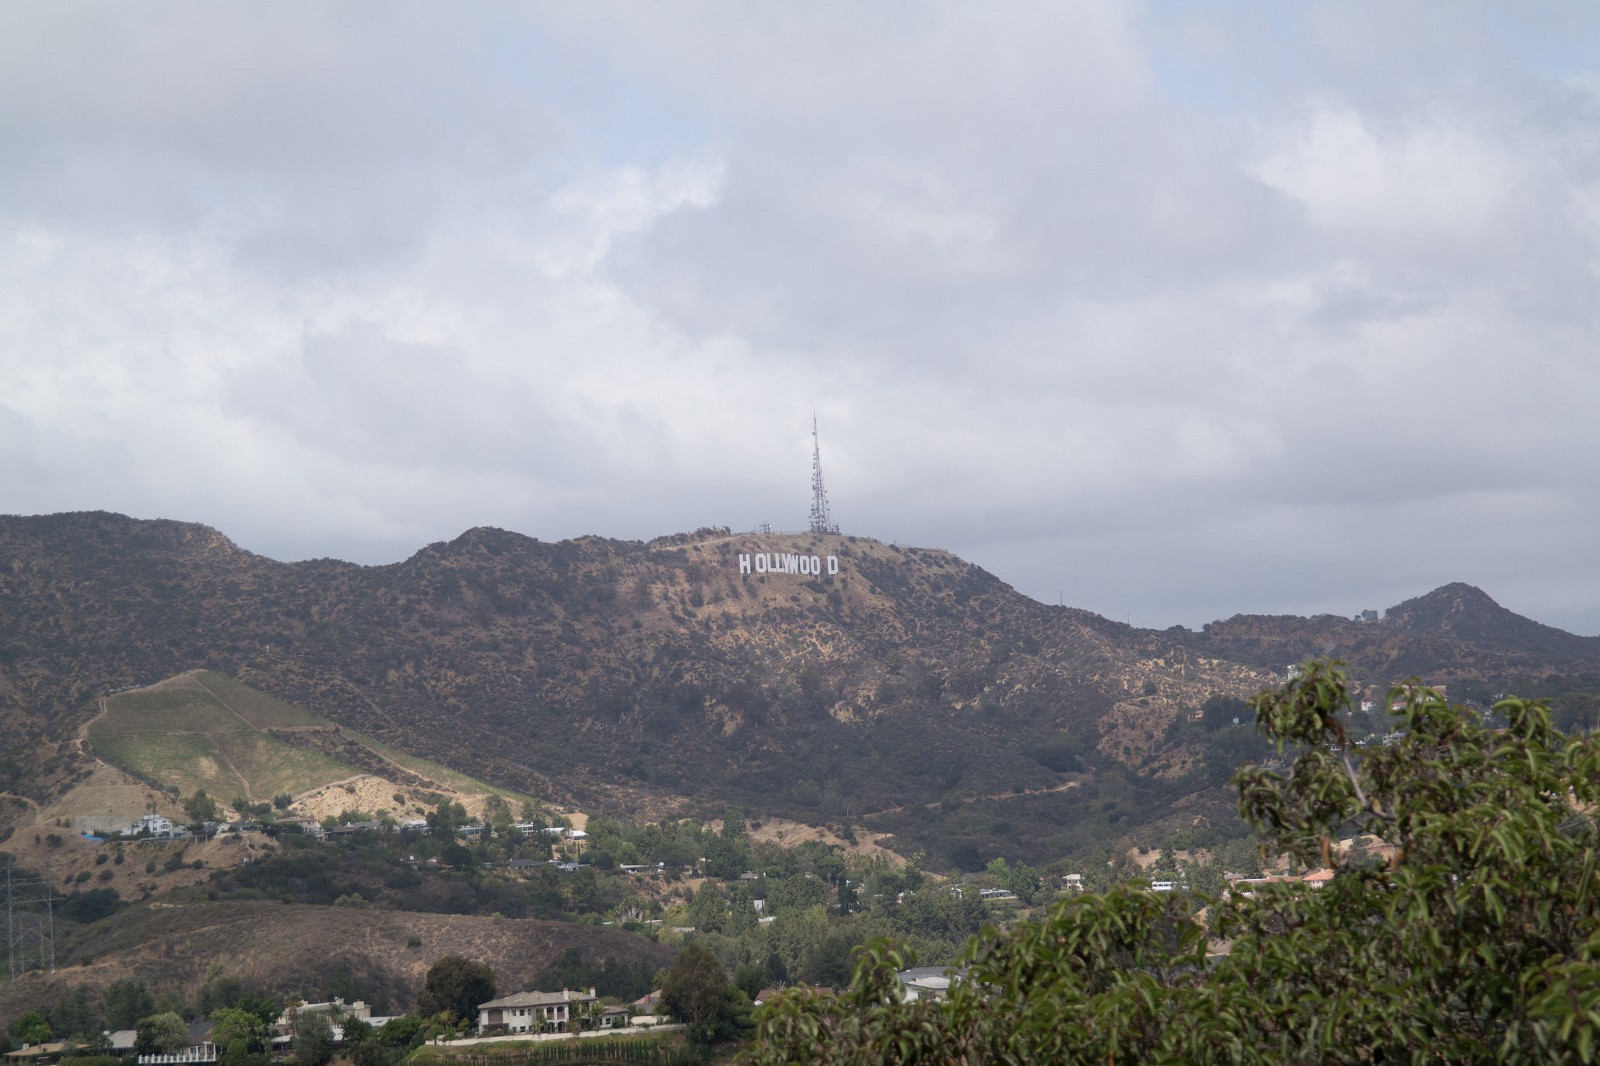 Photo of the Hollywood sign in distance